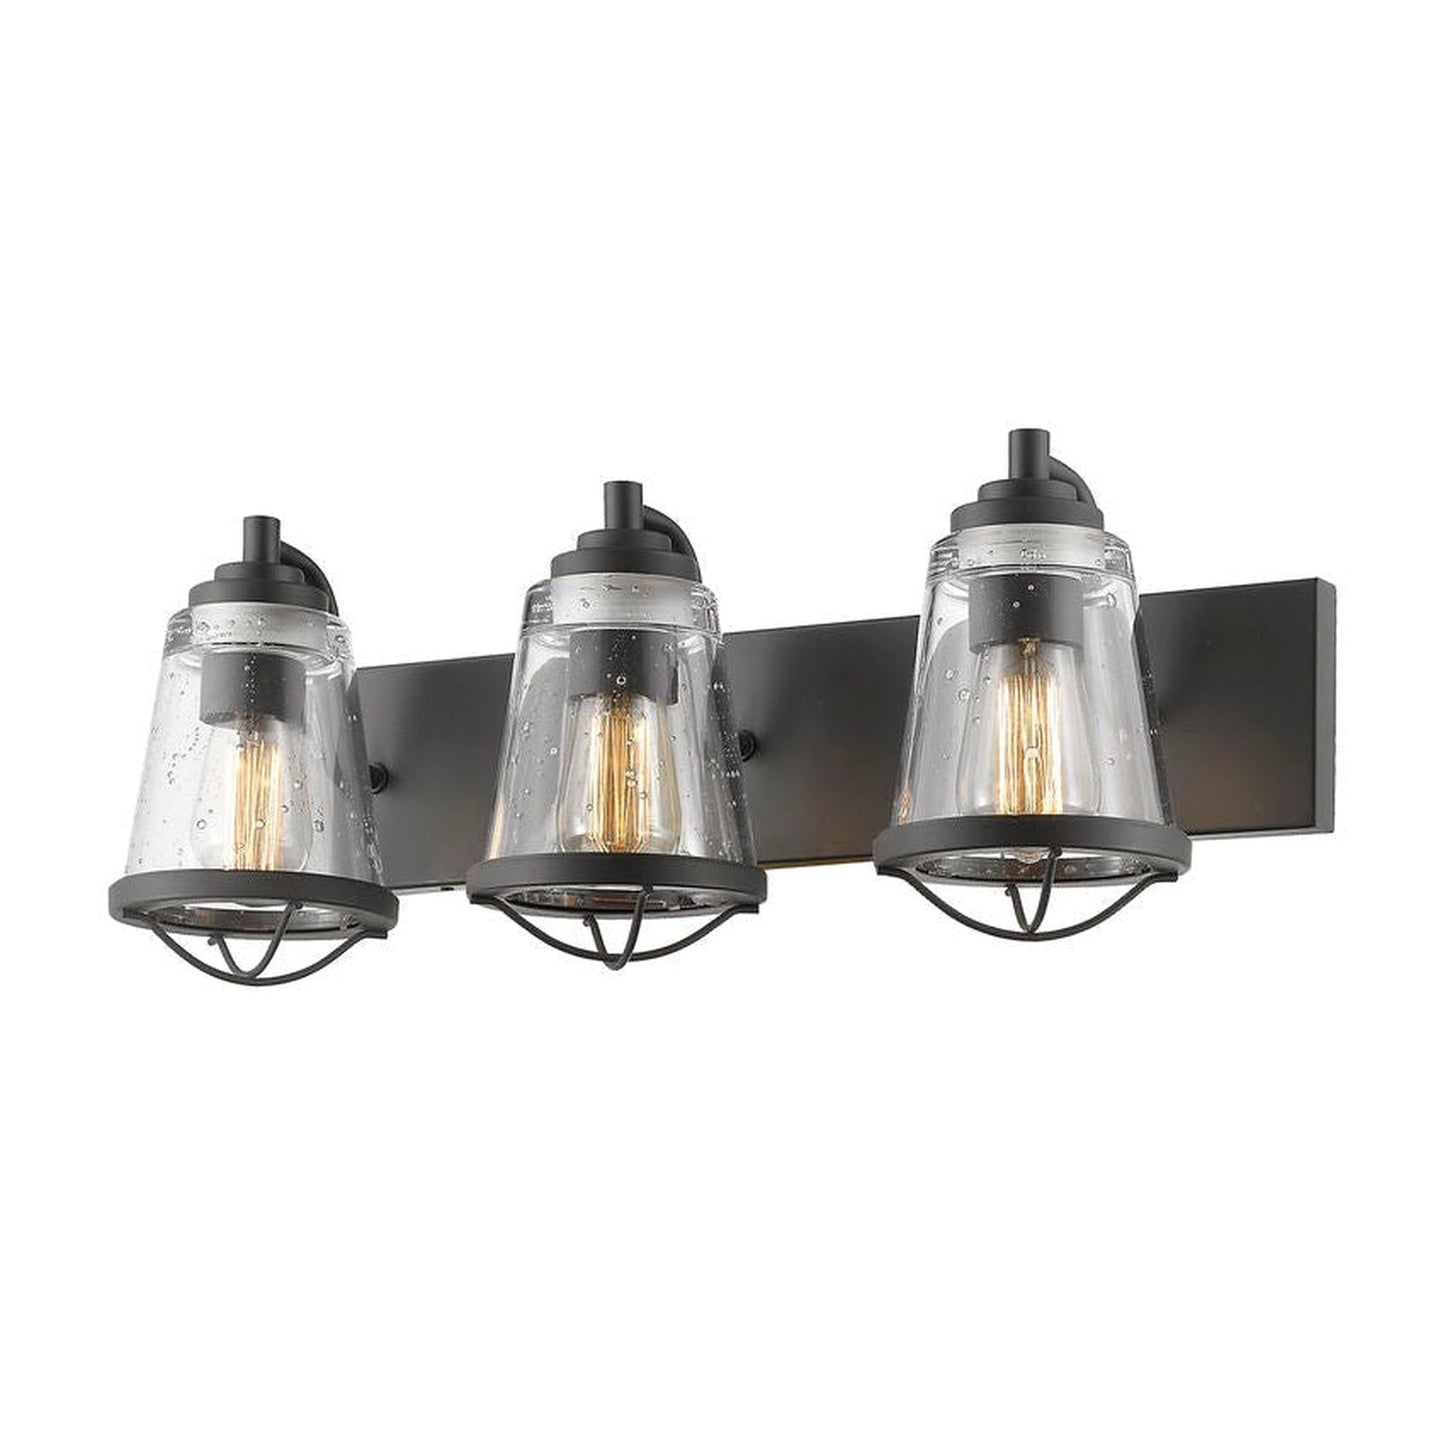 Z-Lite Mariner 24" 3-Light Bronze Vanity Light With Clear Seedy Glass Shade